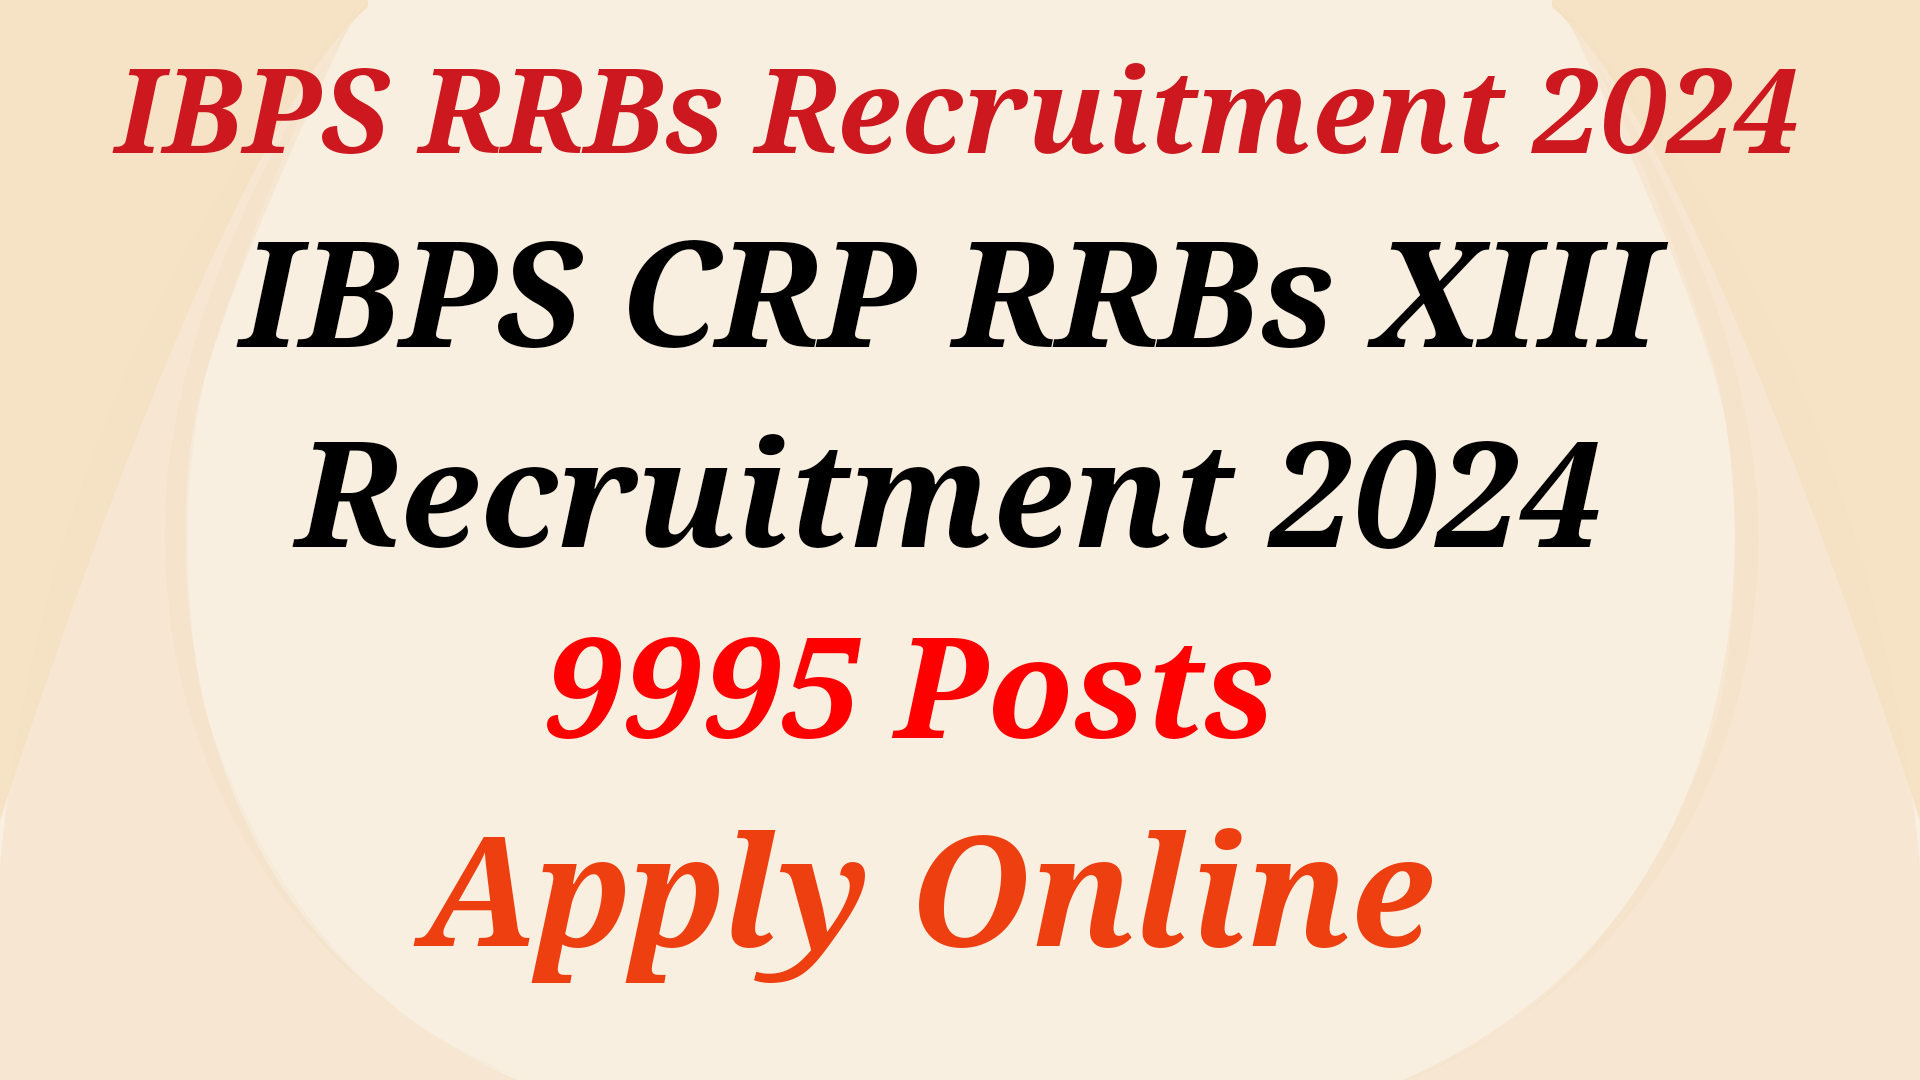 IBPS CRP RRB XIII Recruitment 2024 (9995 Posts) – Apply Online